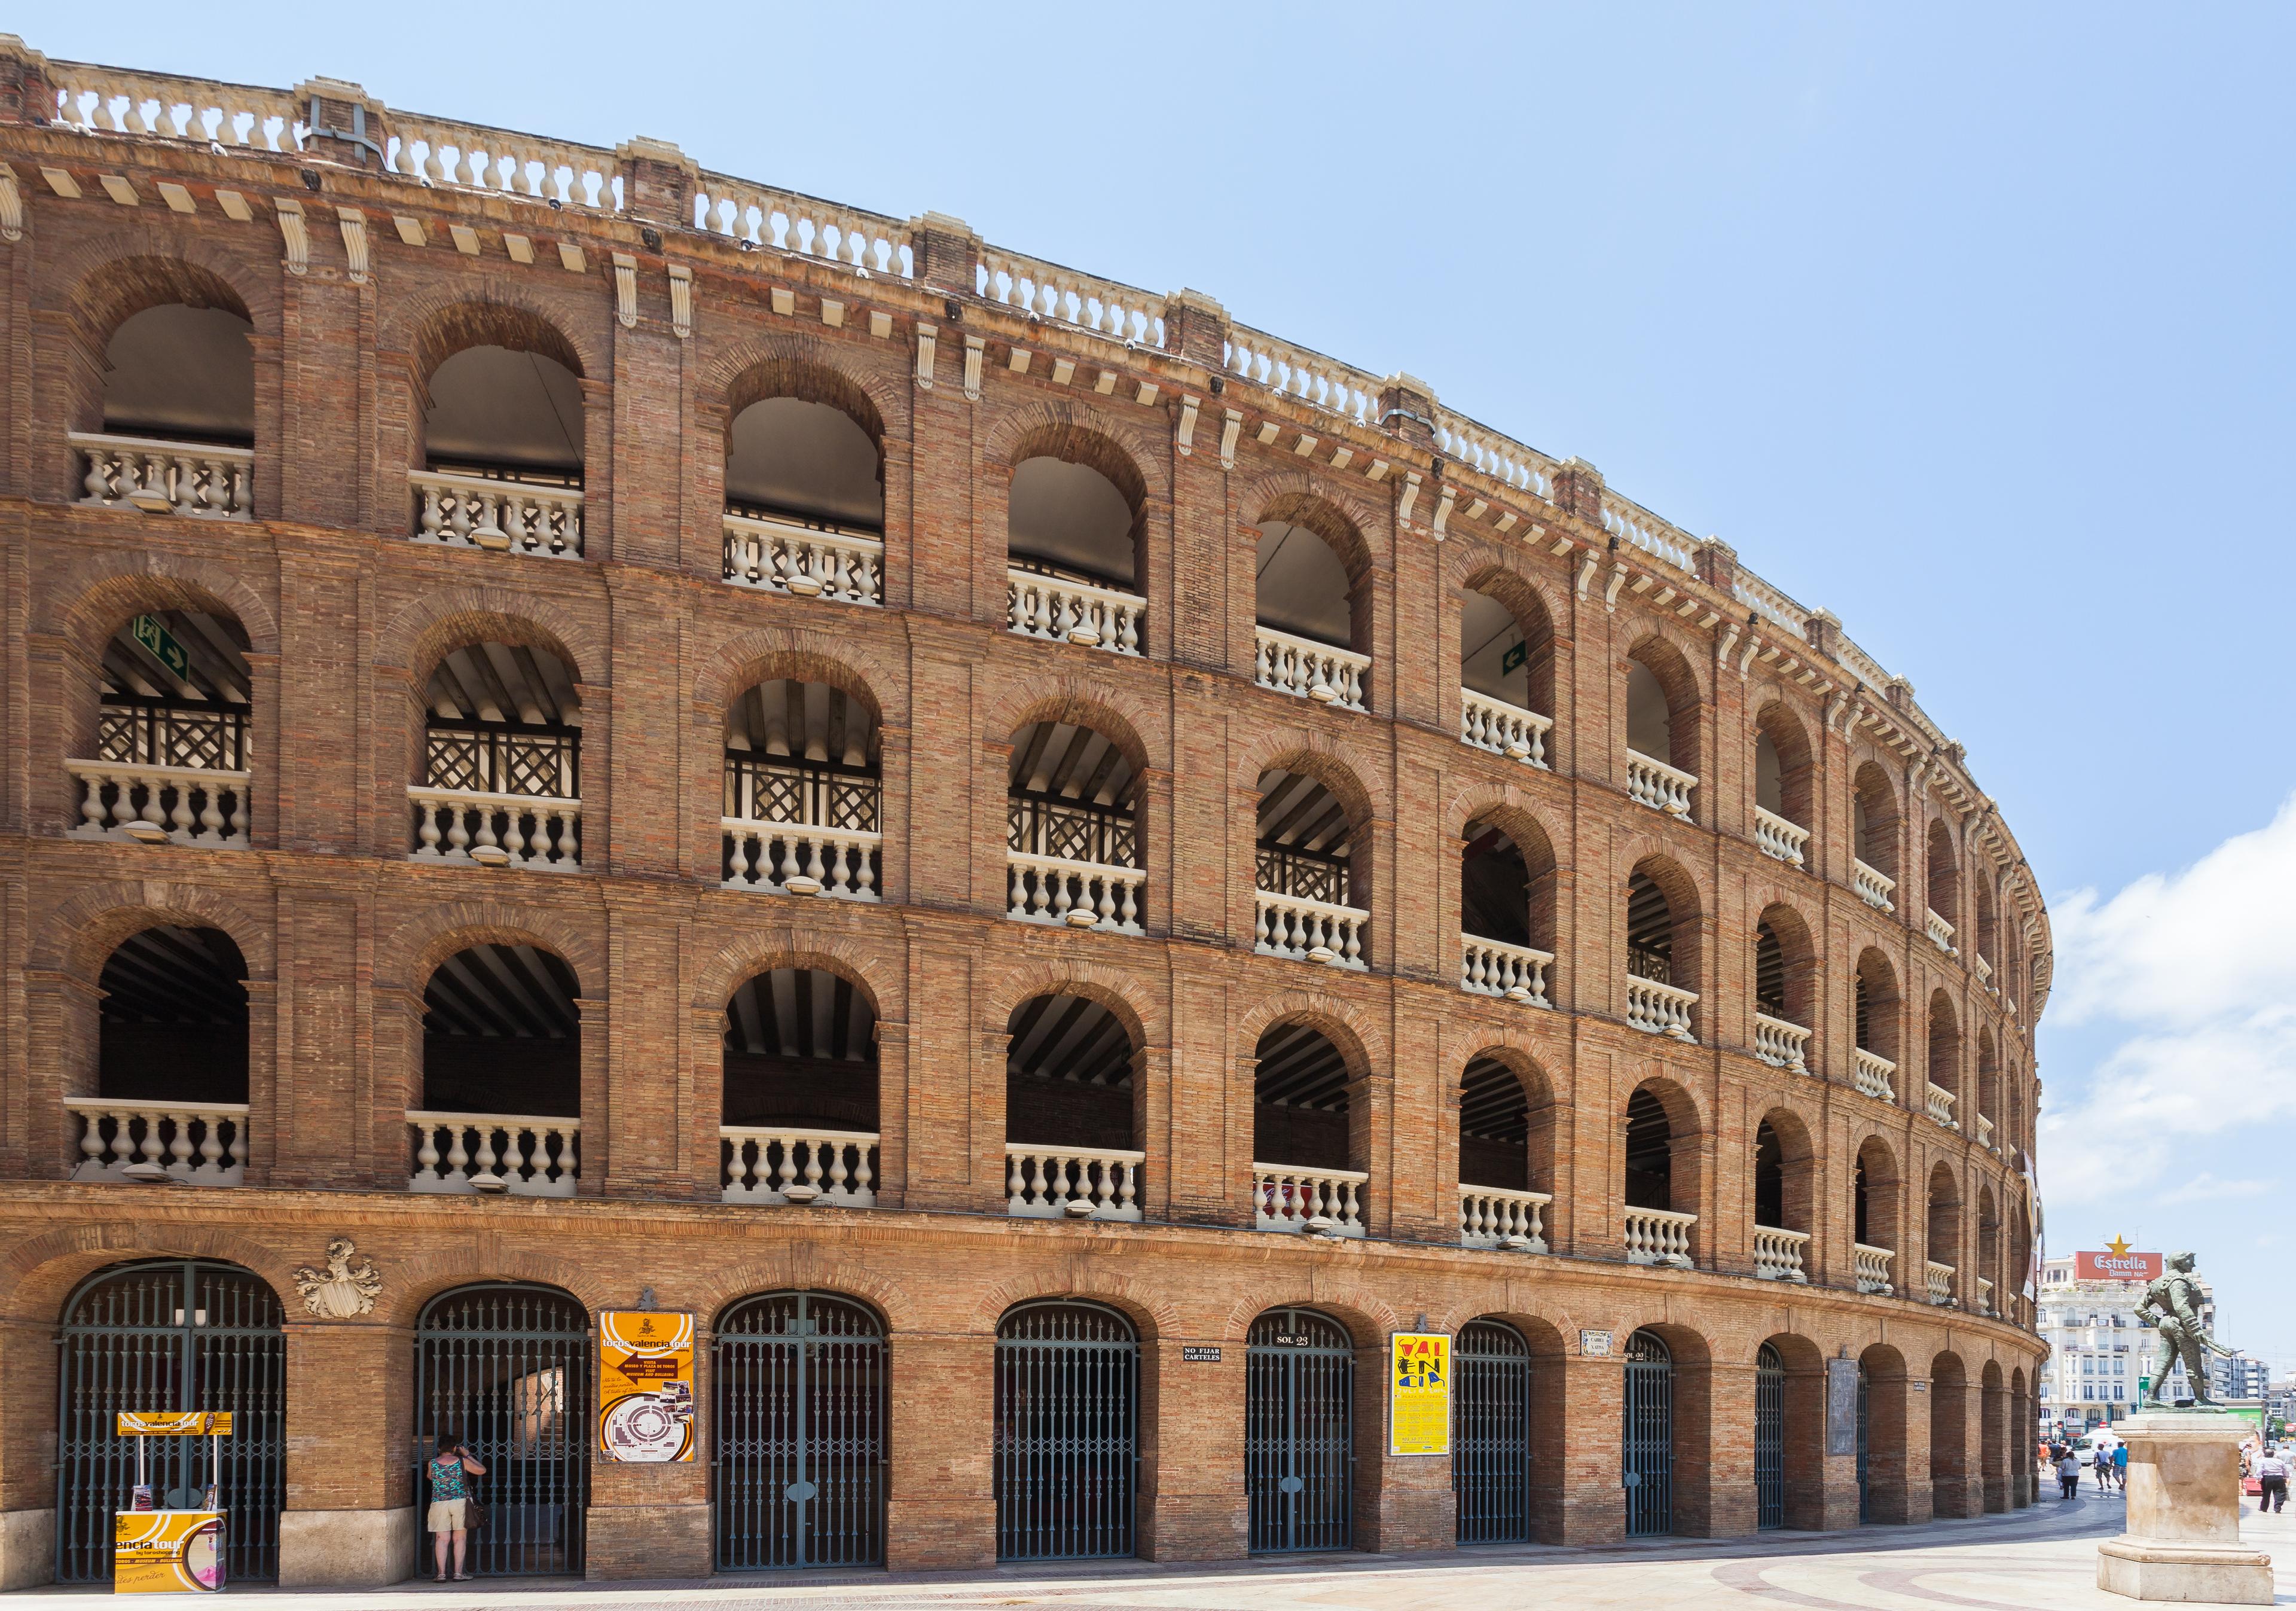 How to get to the Valencia Bullring